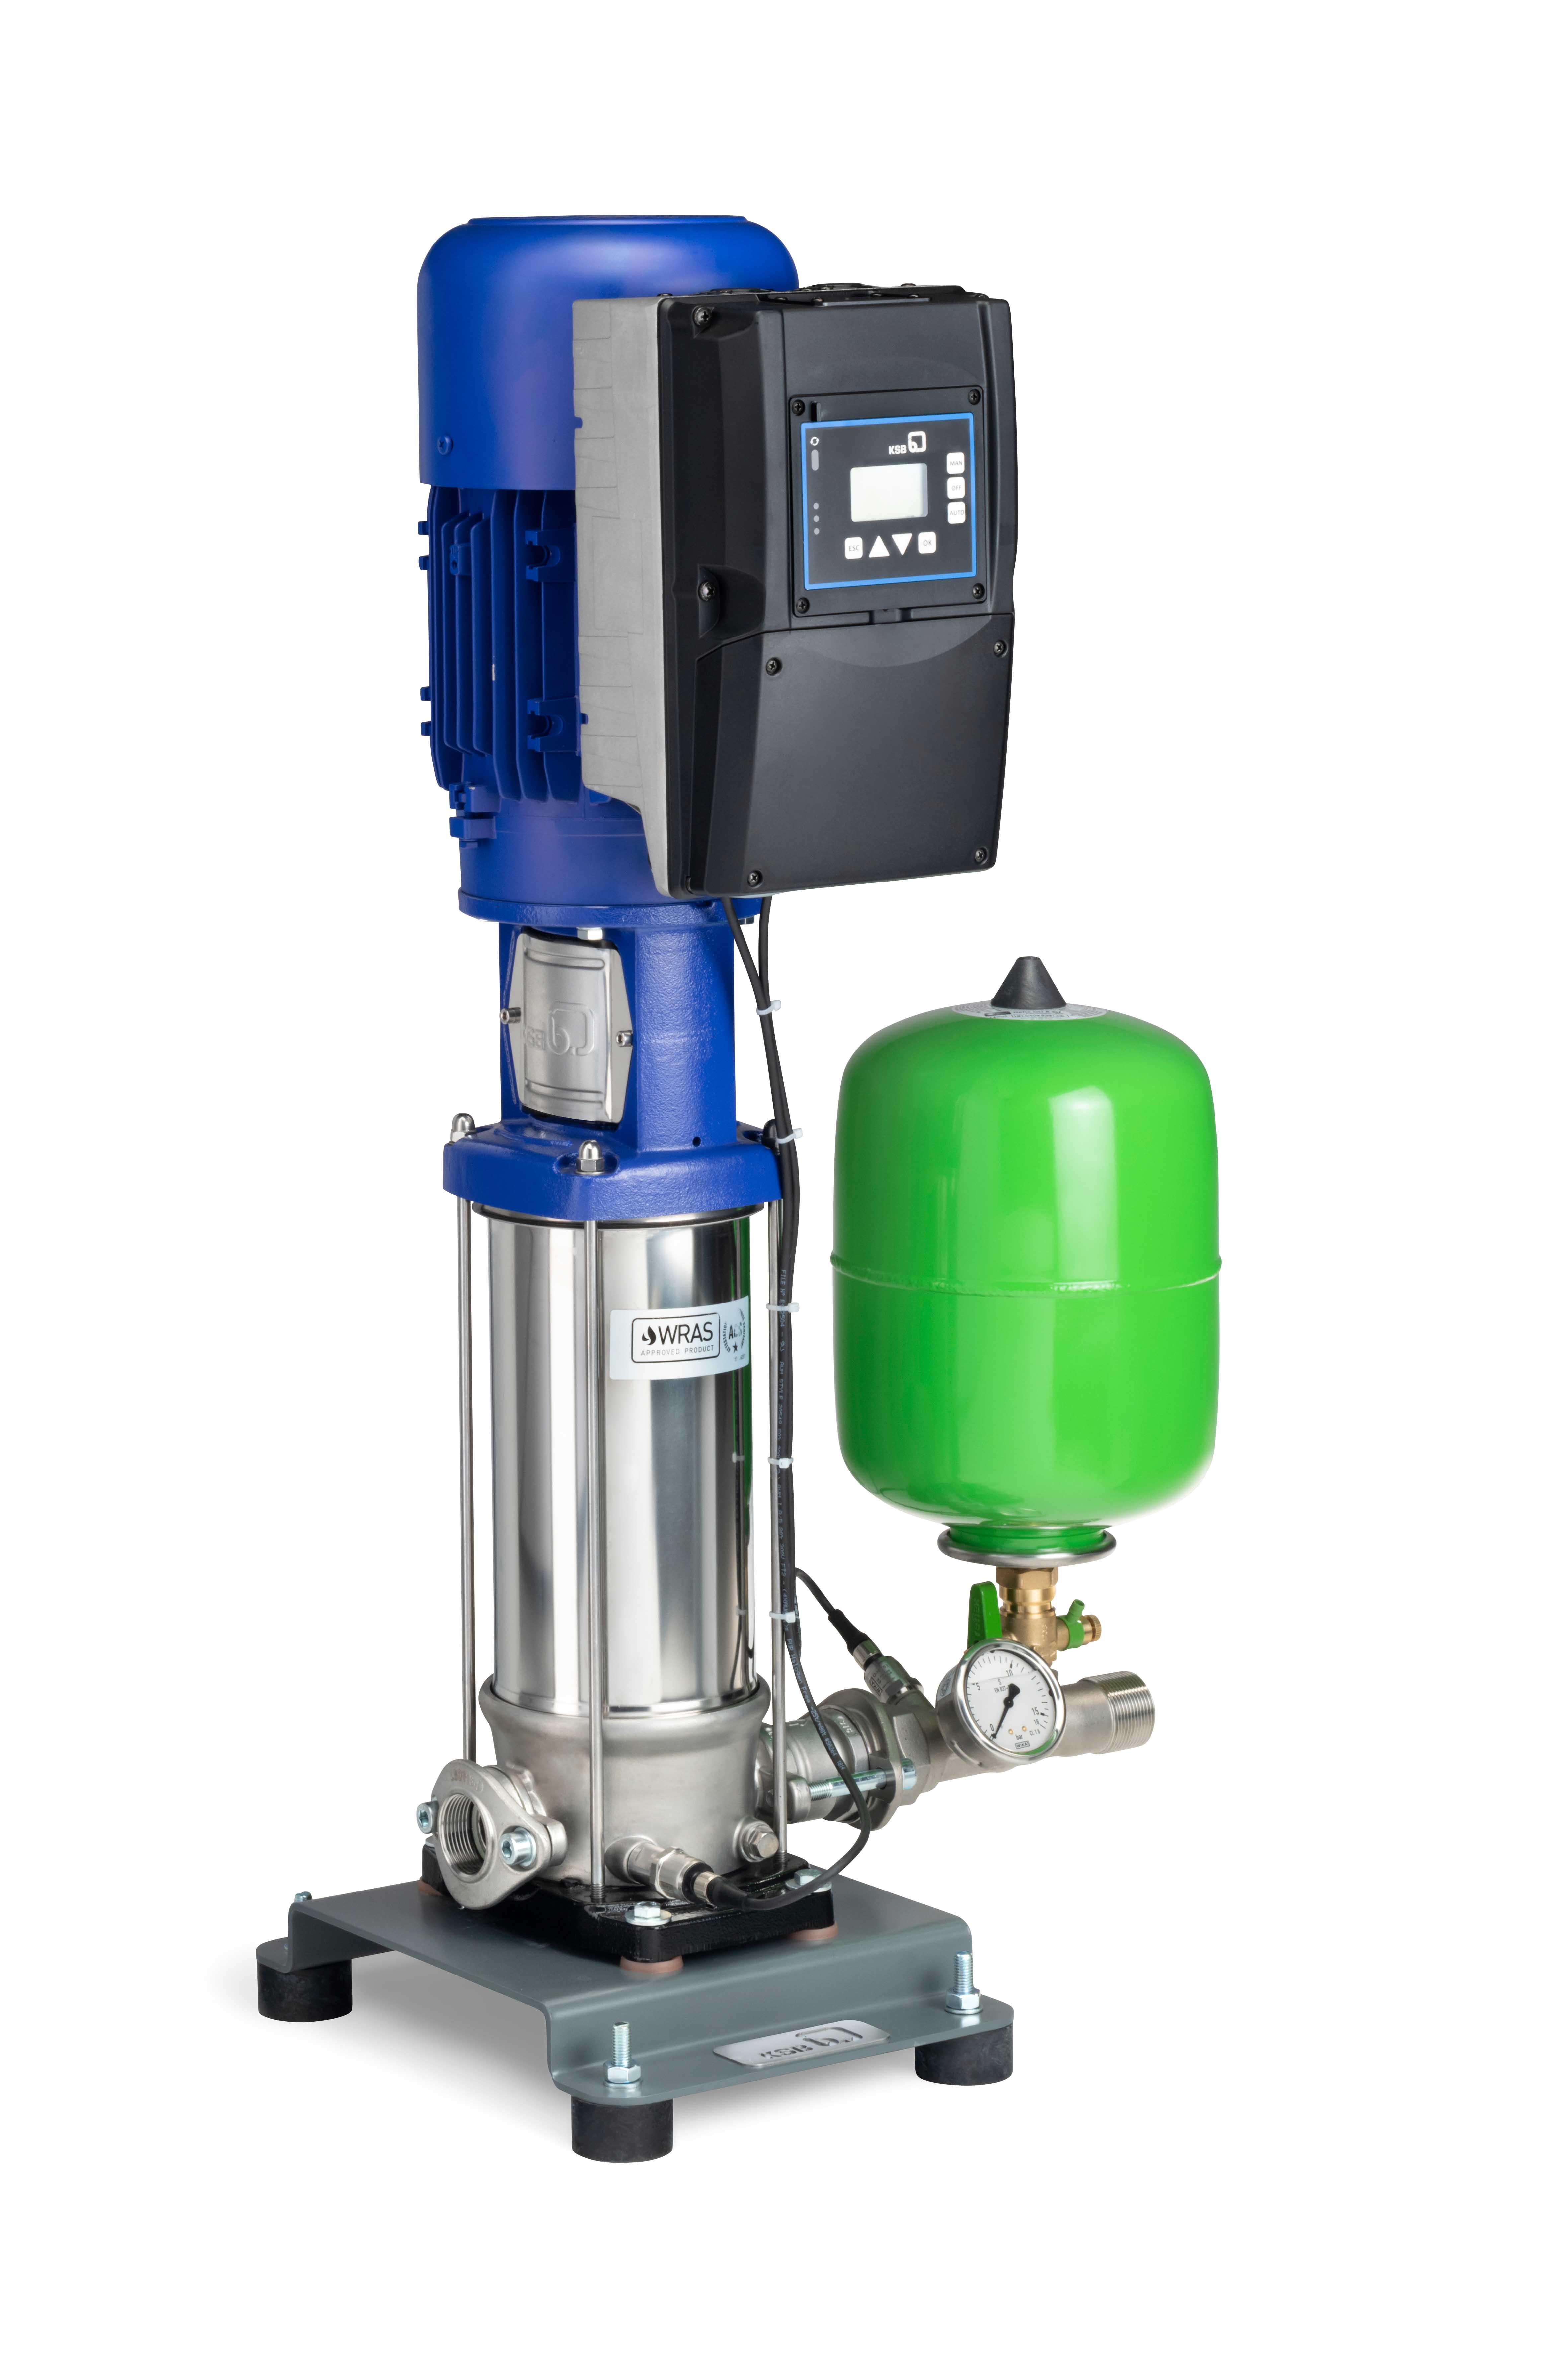 The SVP version of the new KSB Delta Solo pressure booster system is driven by synchronous reluctance motors from the KSB SuPremE type series.